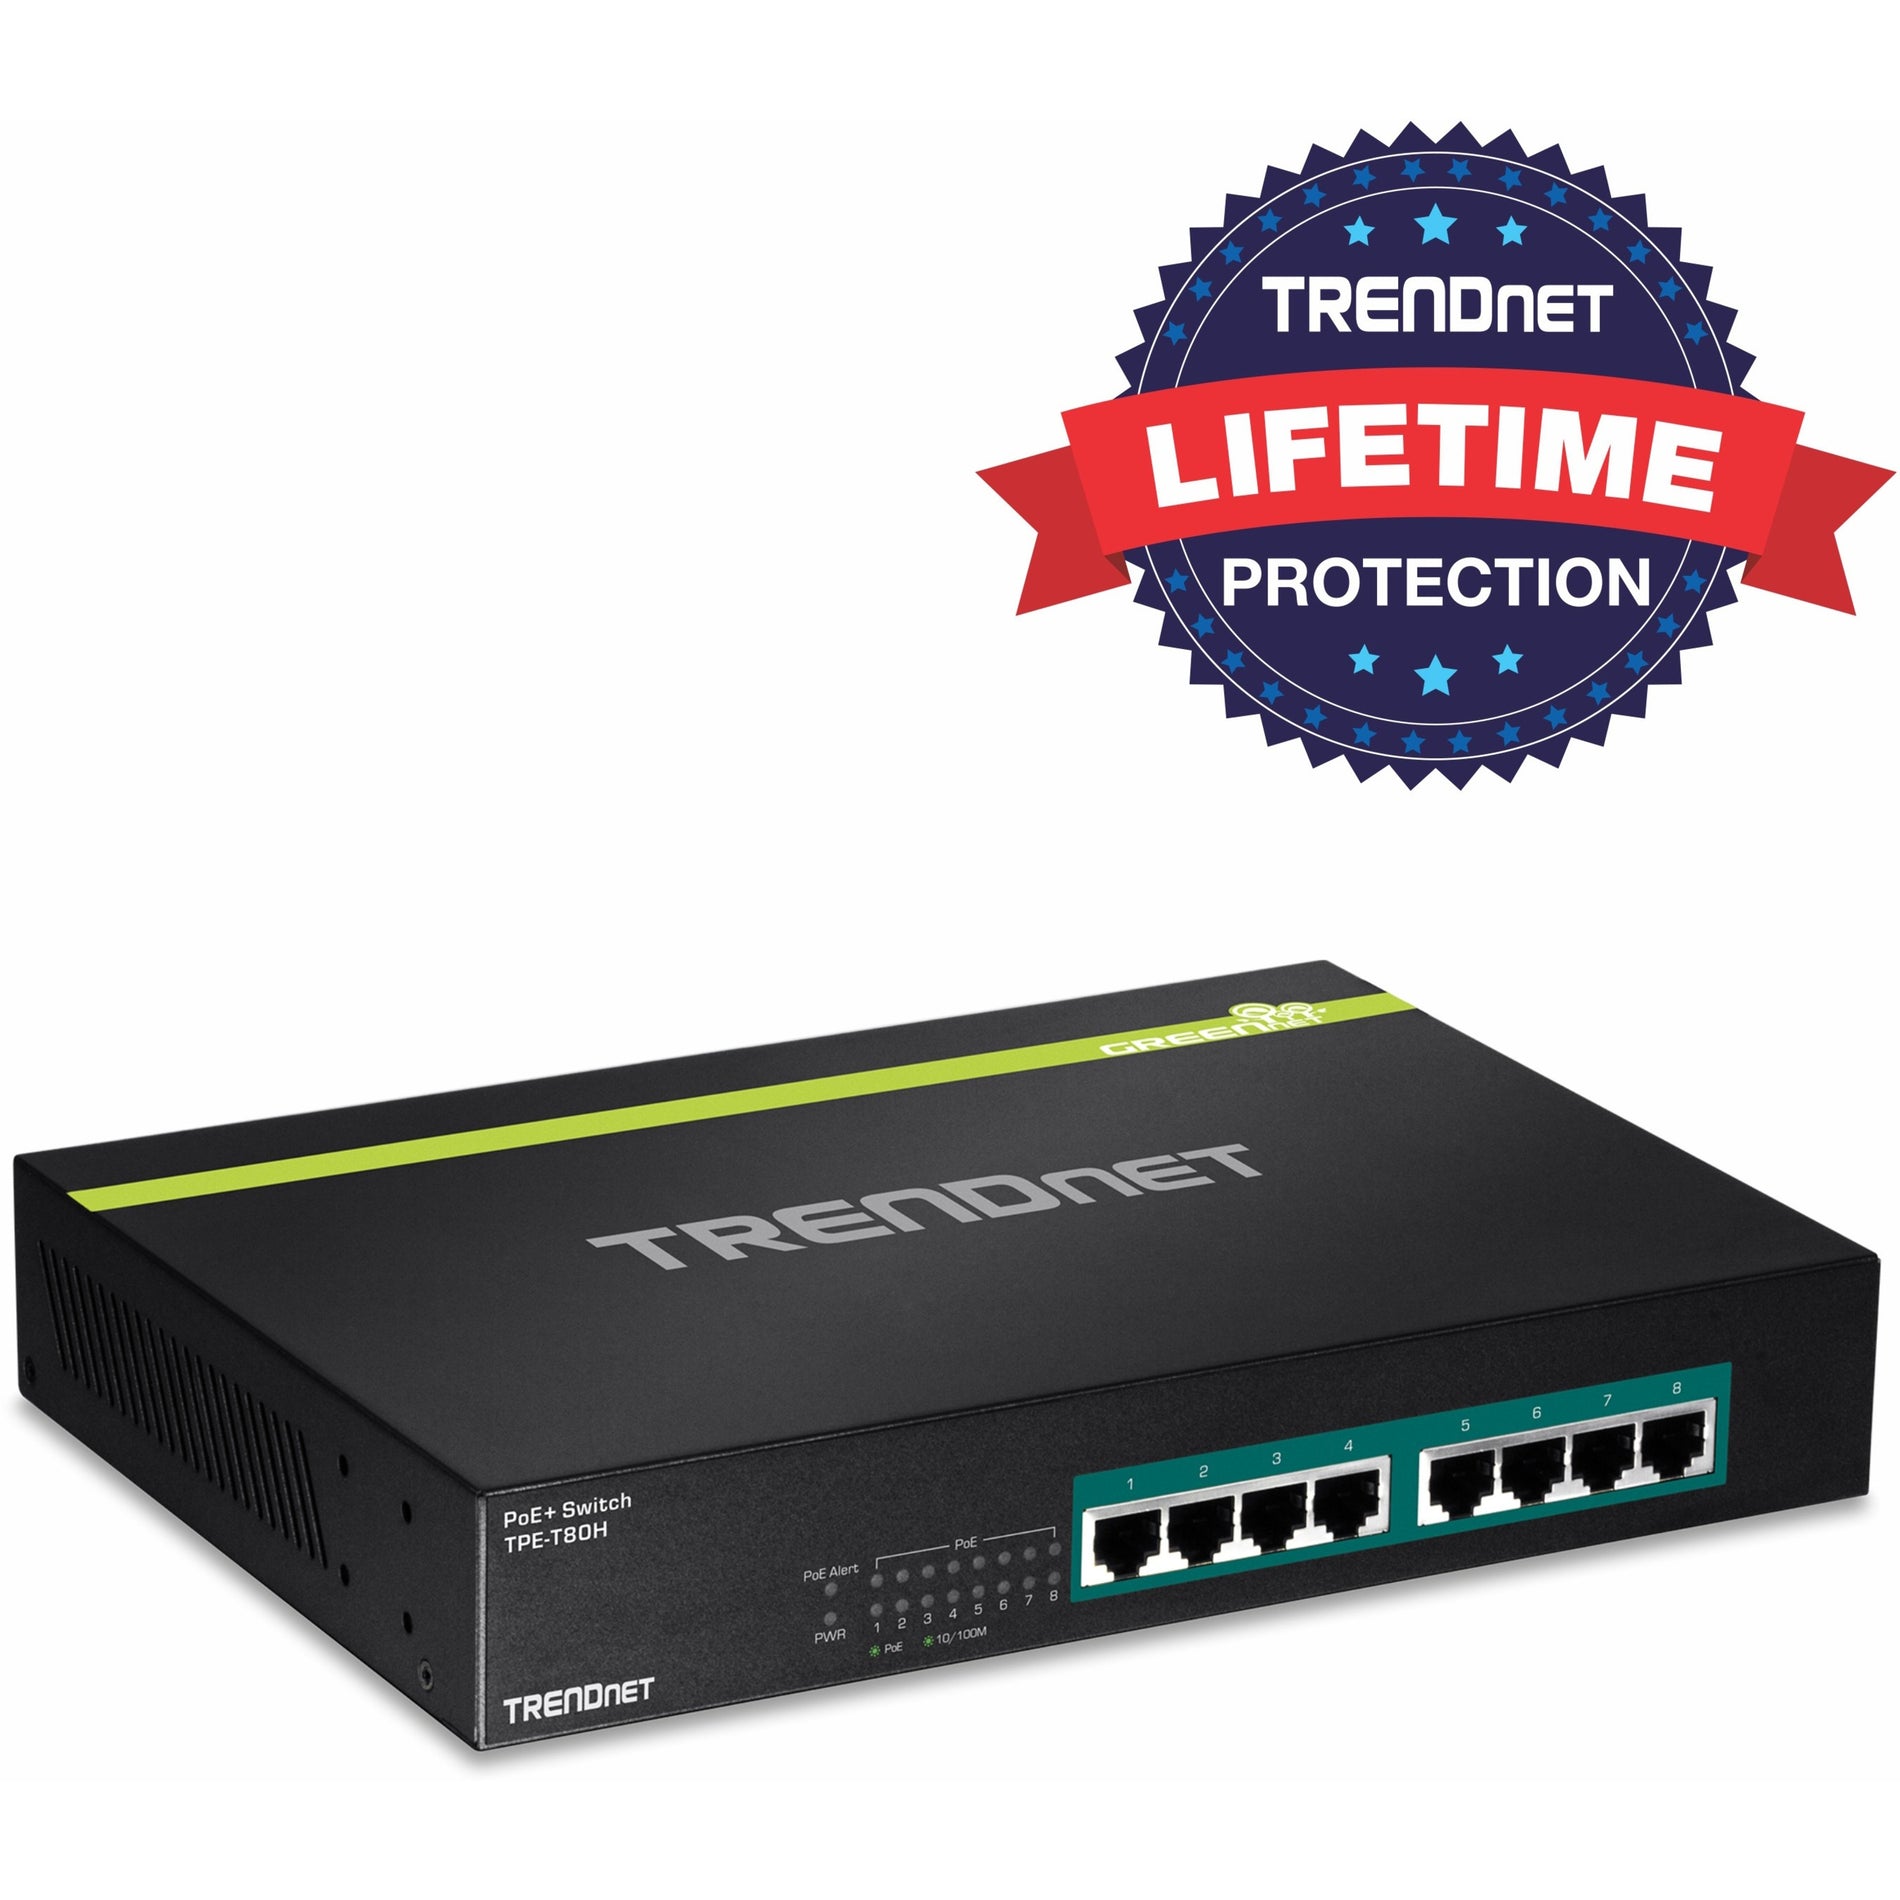 TRENDnet 8-Port 10/100 Mbps GREENnet PoE+ Switch; TPE-T80H; Rack Mountable; 8 x 10/100 Mbps PoE+ Ports; Up to 30 Watts Per Port with 125 W Total Power Budget; Lifetime Protection